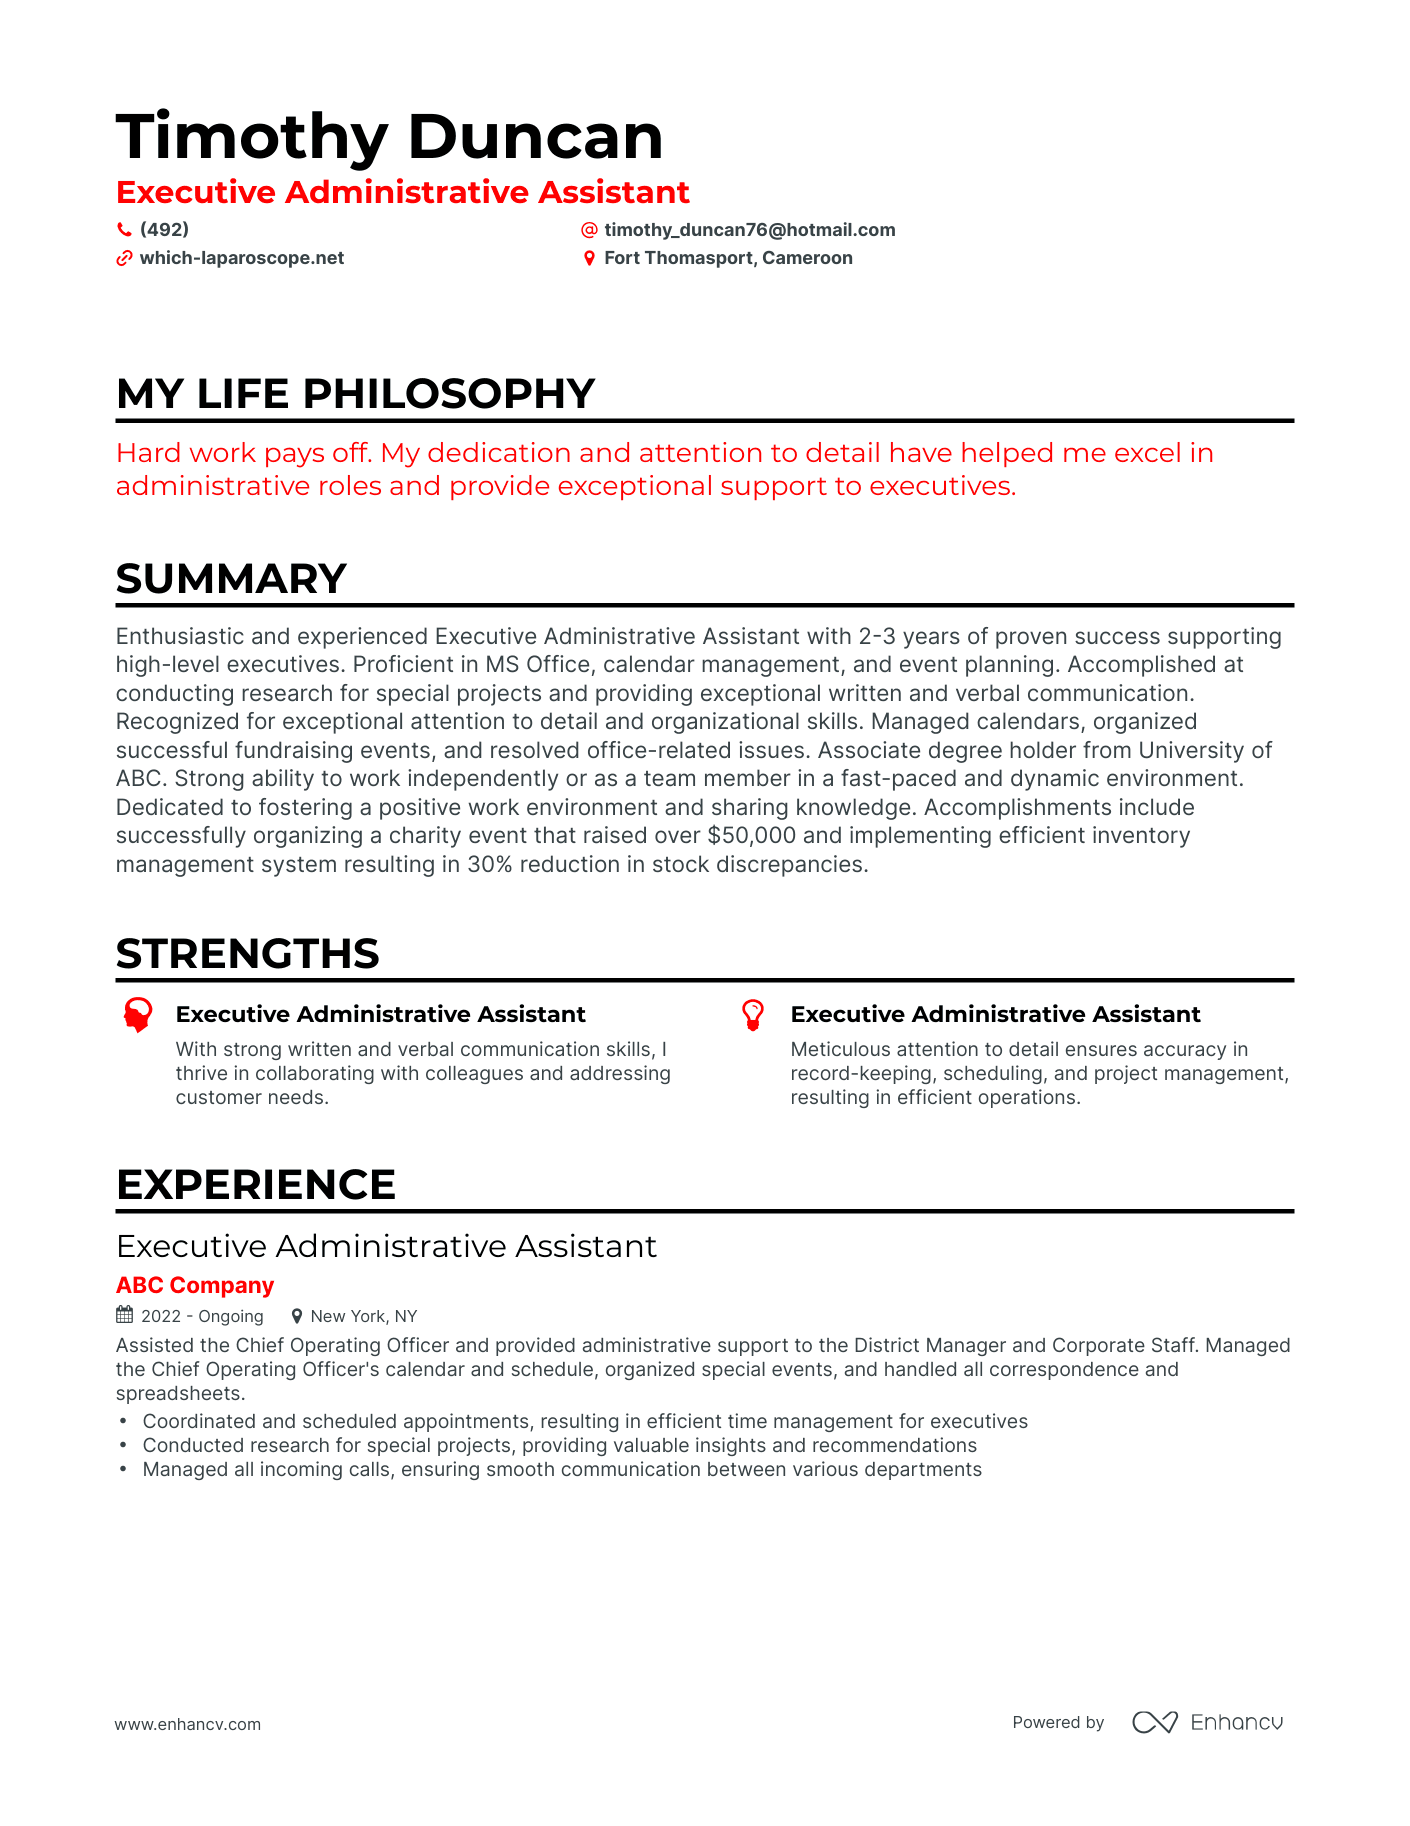 Creative Executive Administrative Assistant Resume Example